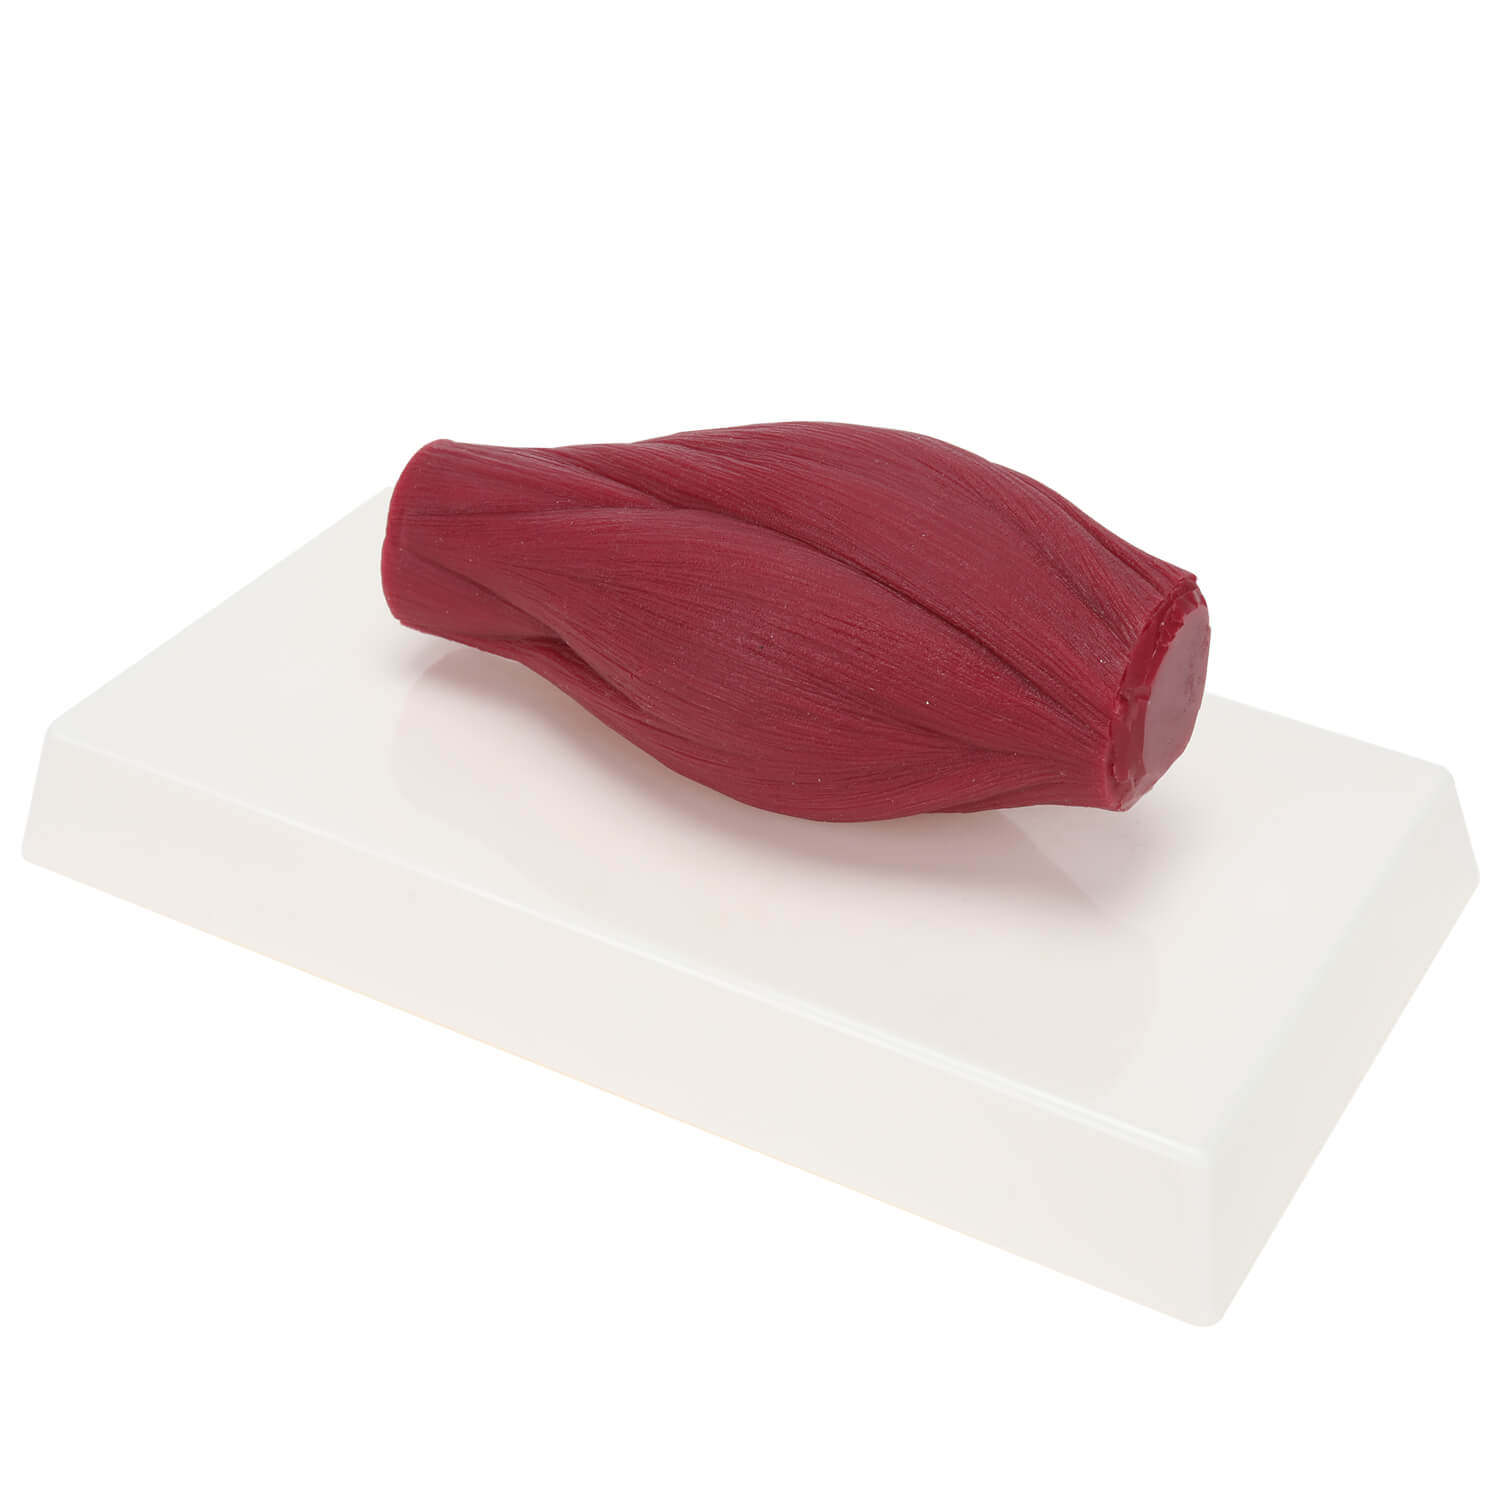 Muscle Model 1 Pound Muscle Model That Simulates Real Muscle Tissue